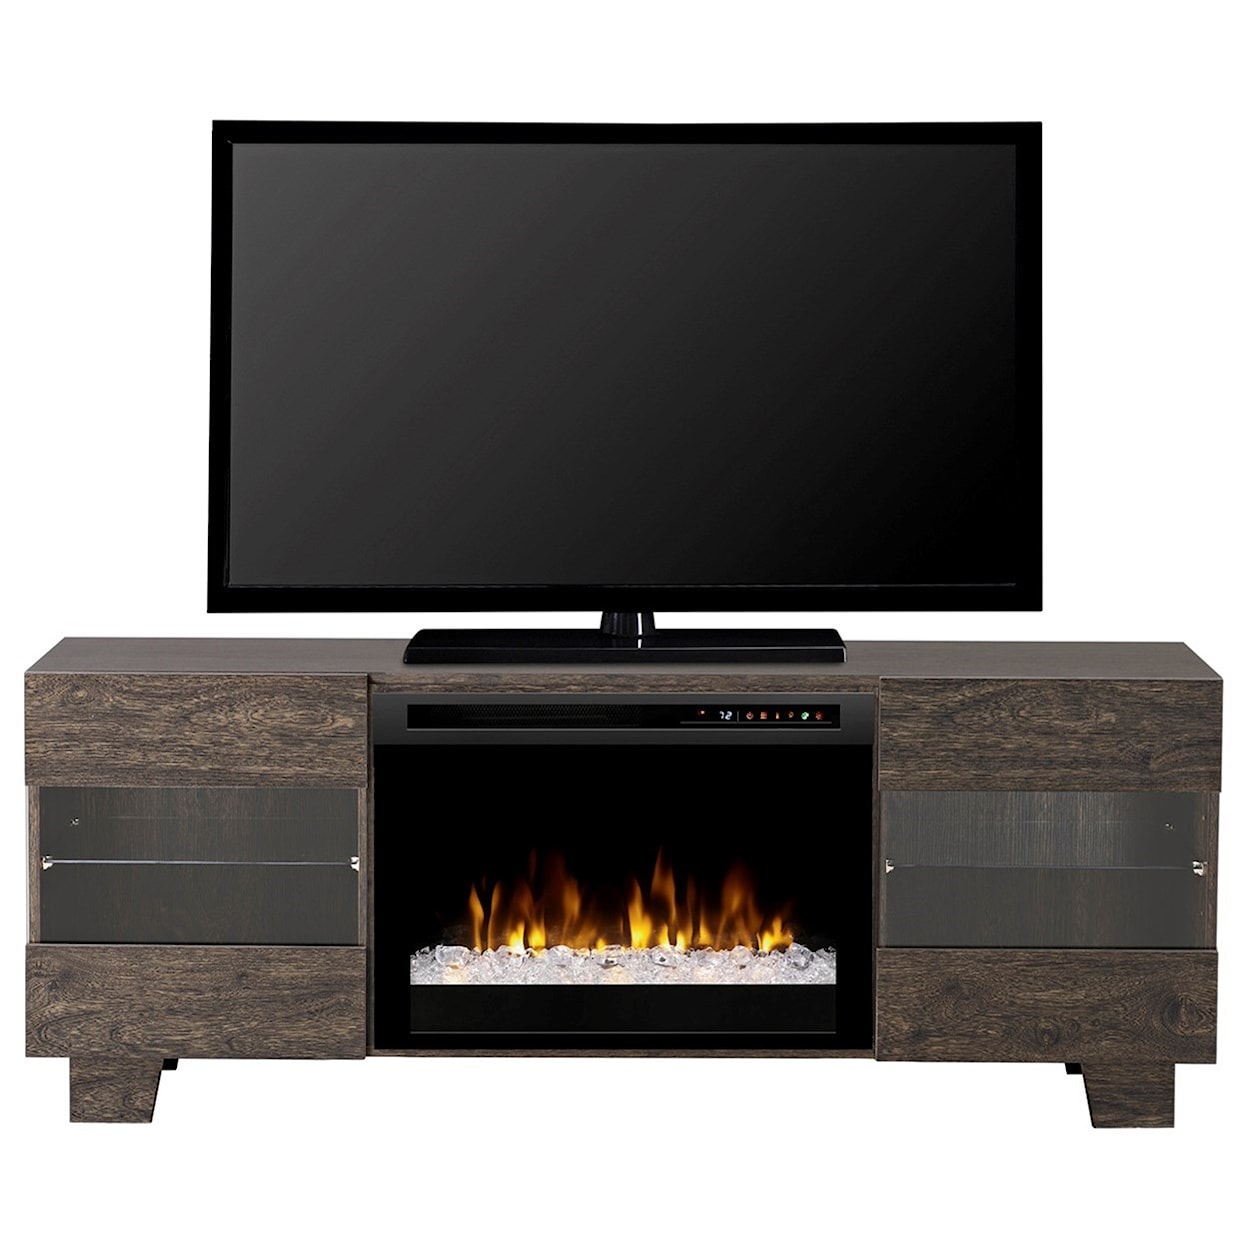 Dimplex Media Console Fireplaces Max Acrylic Ice Media Mantel Fireplace